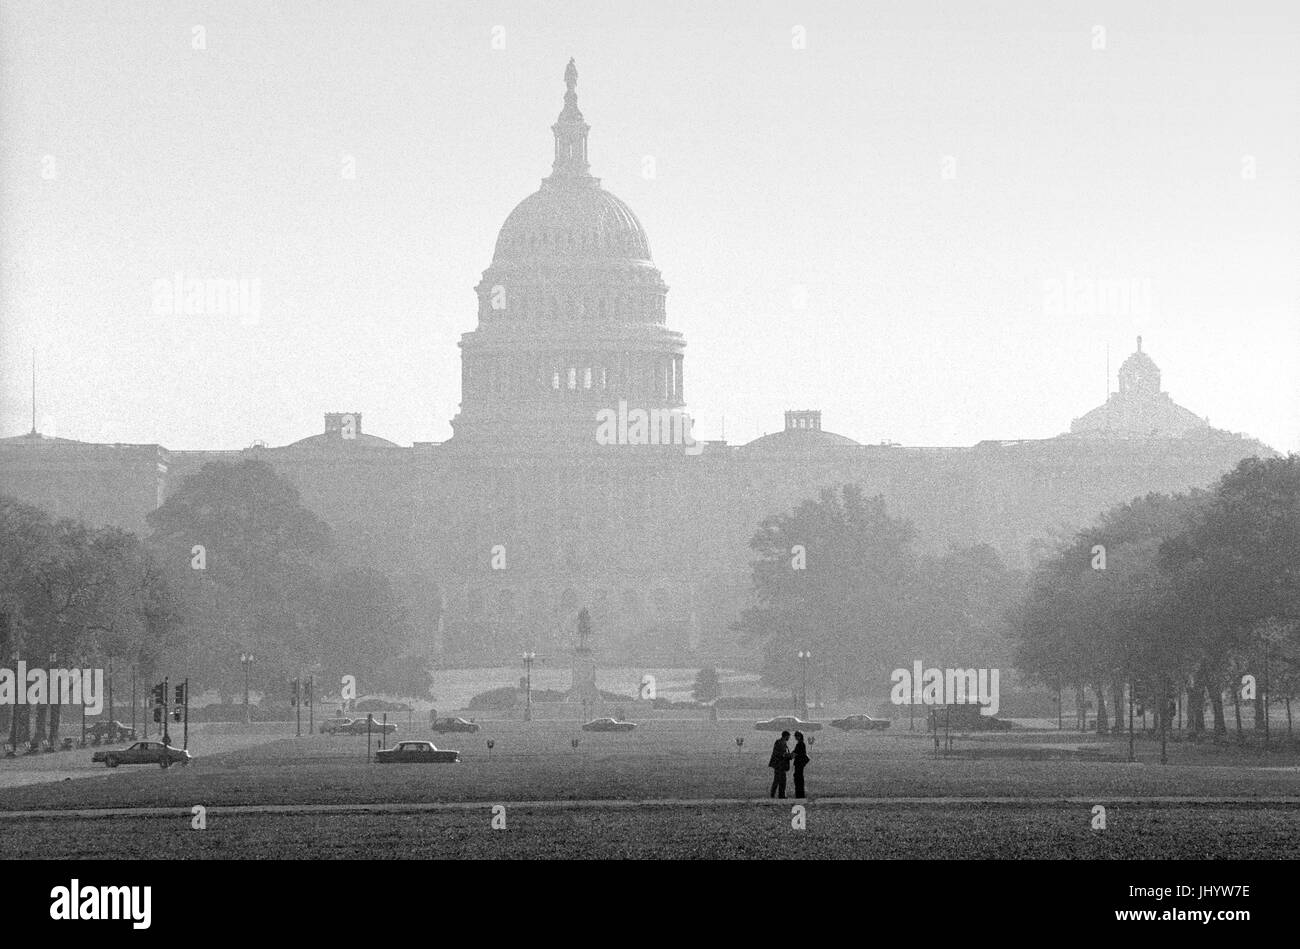 Washington DC, USA. The Capitol Building looking along the National Mall in early Autumn. October 1977 The United States Capitol, often called the Capitol Building, is the home of the United States Congress, and the seat of the legislative branch of the U.S. federal government. It sits atop Capitol Hill at the eastern end of the National Mall in Washington, D.C. Though not at the geographic center of the Federal District, the Capitol forms the origin point for the District's street-numbering system and the District's four quadrants. The original building was completed in 1800 and was subsequen Stock Photo